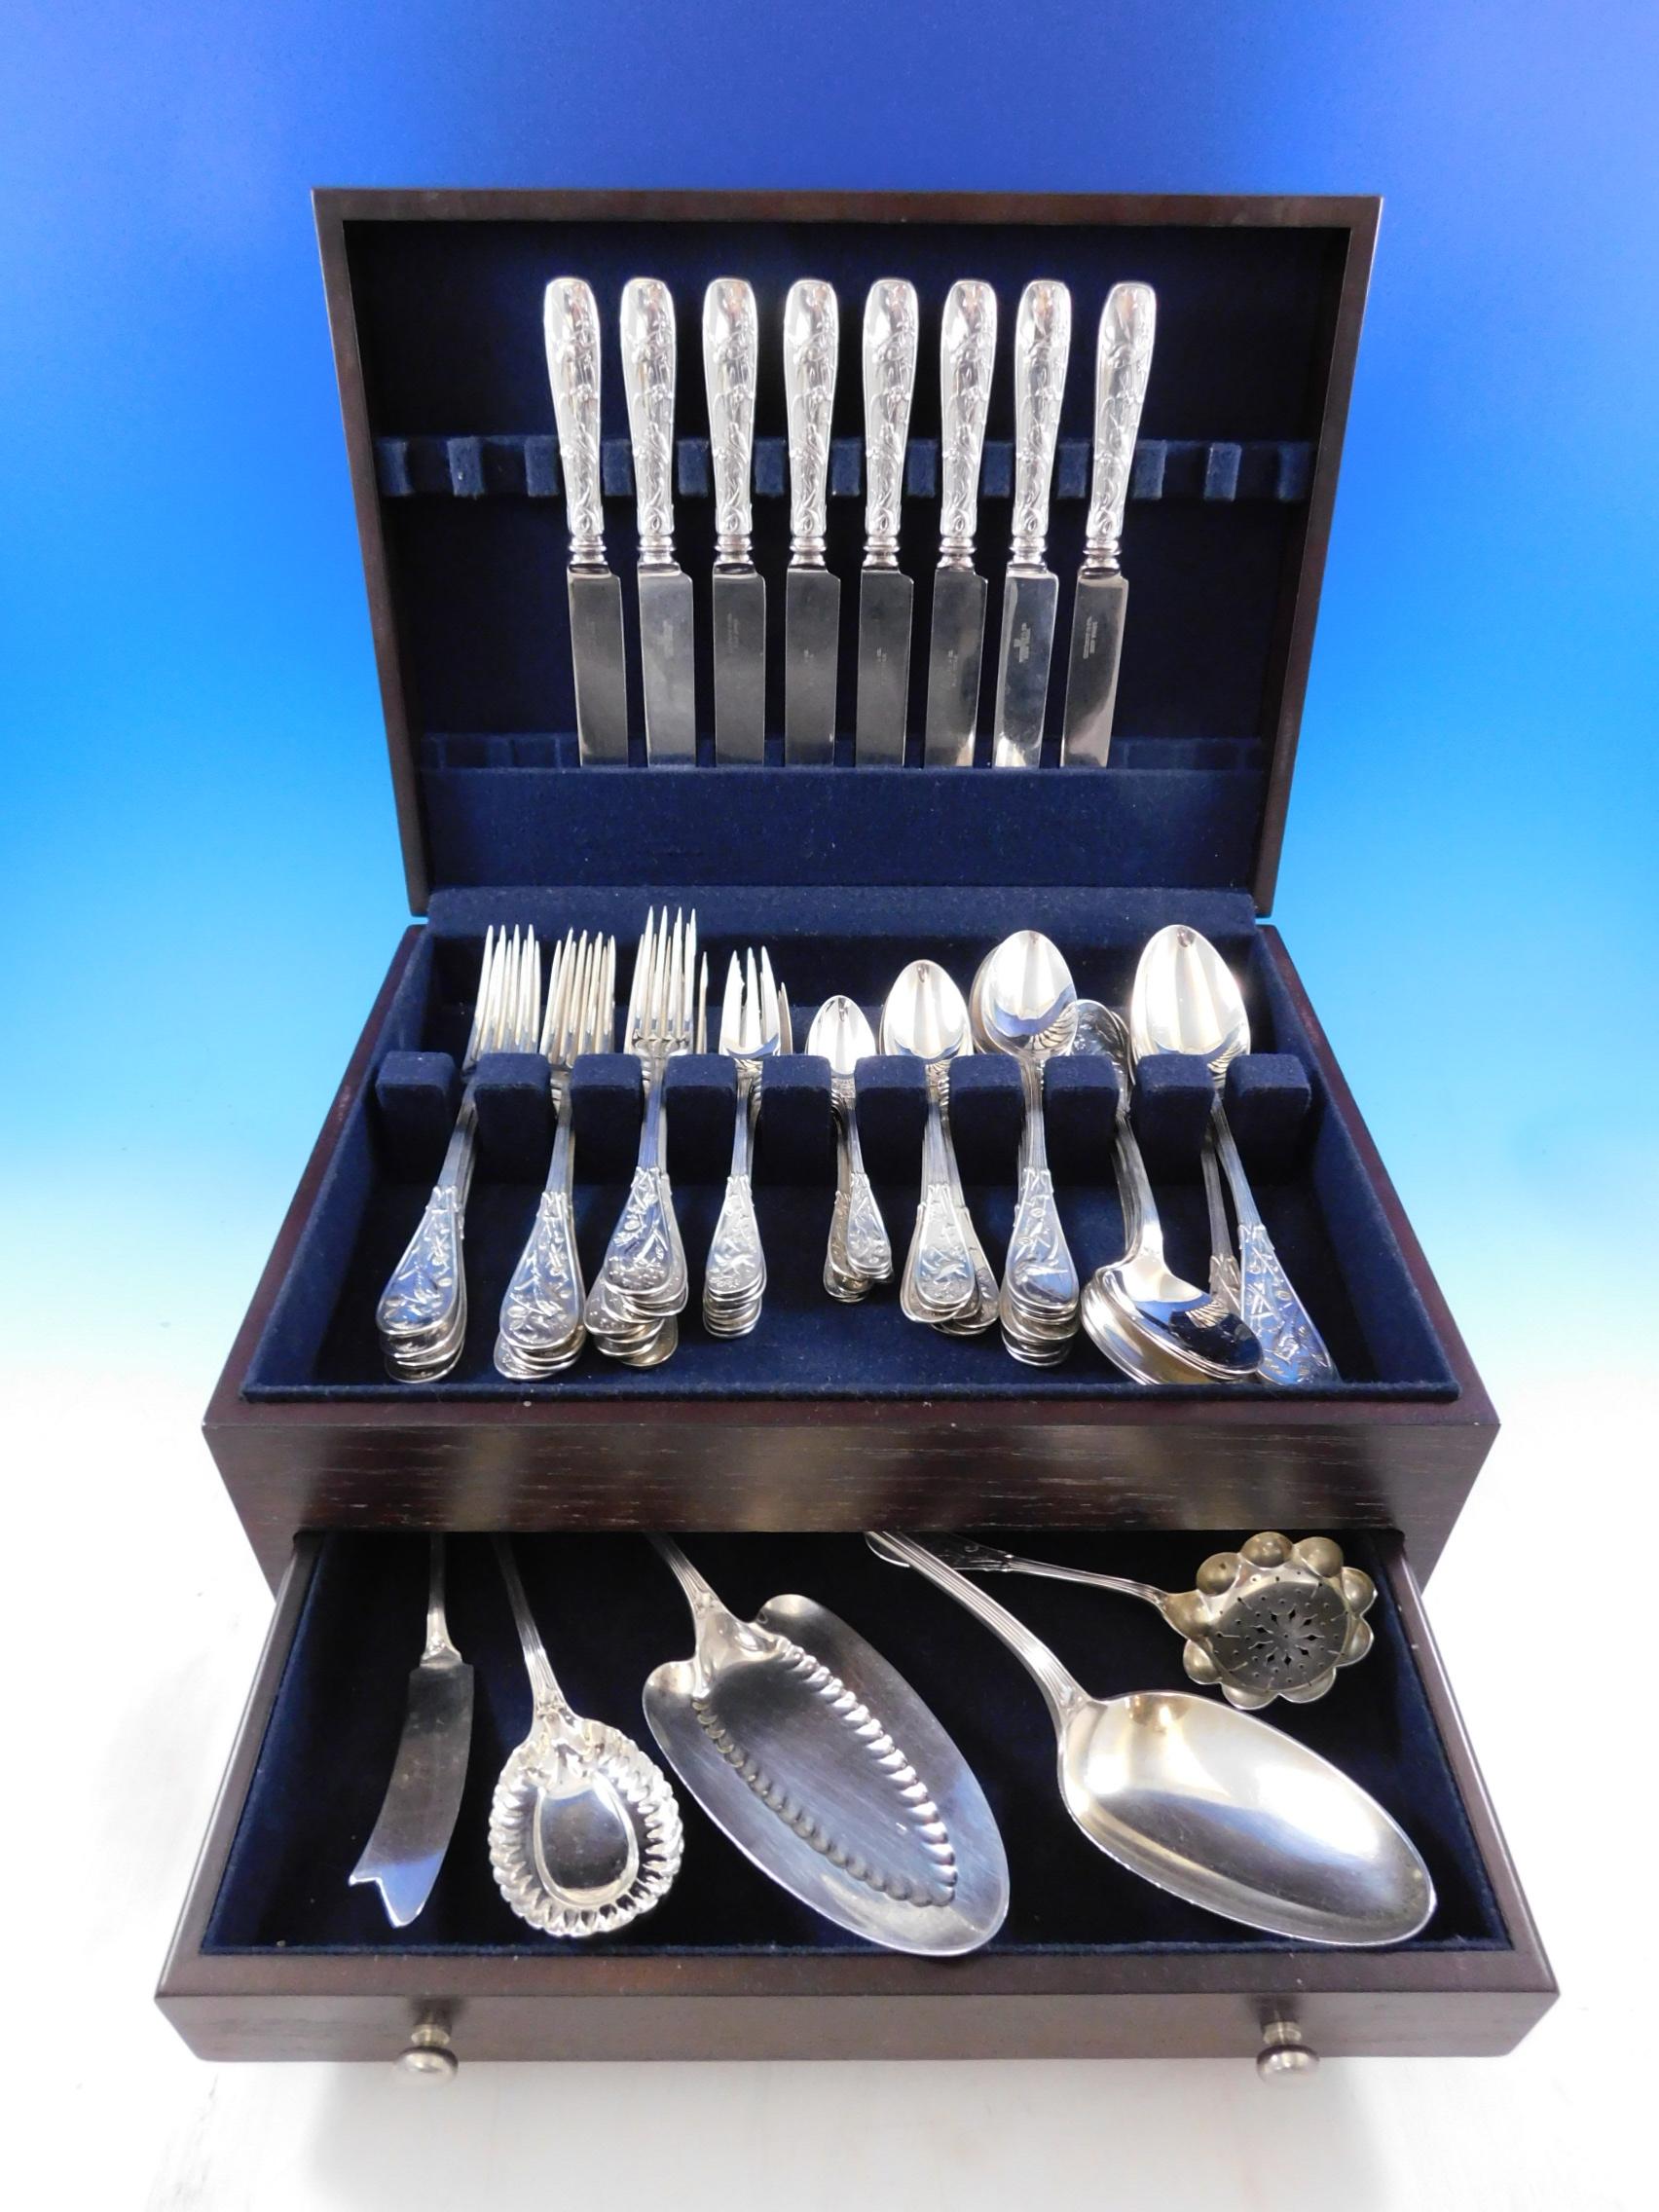 Exceptional antique late 19th century multi-motif Japanese by Tiffany & Co. sterling silver dinner flatware set, 69 pieces. This set includes:

8 regular knives, hollow handle with blunt blades, 9 1/8